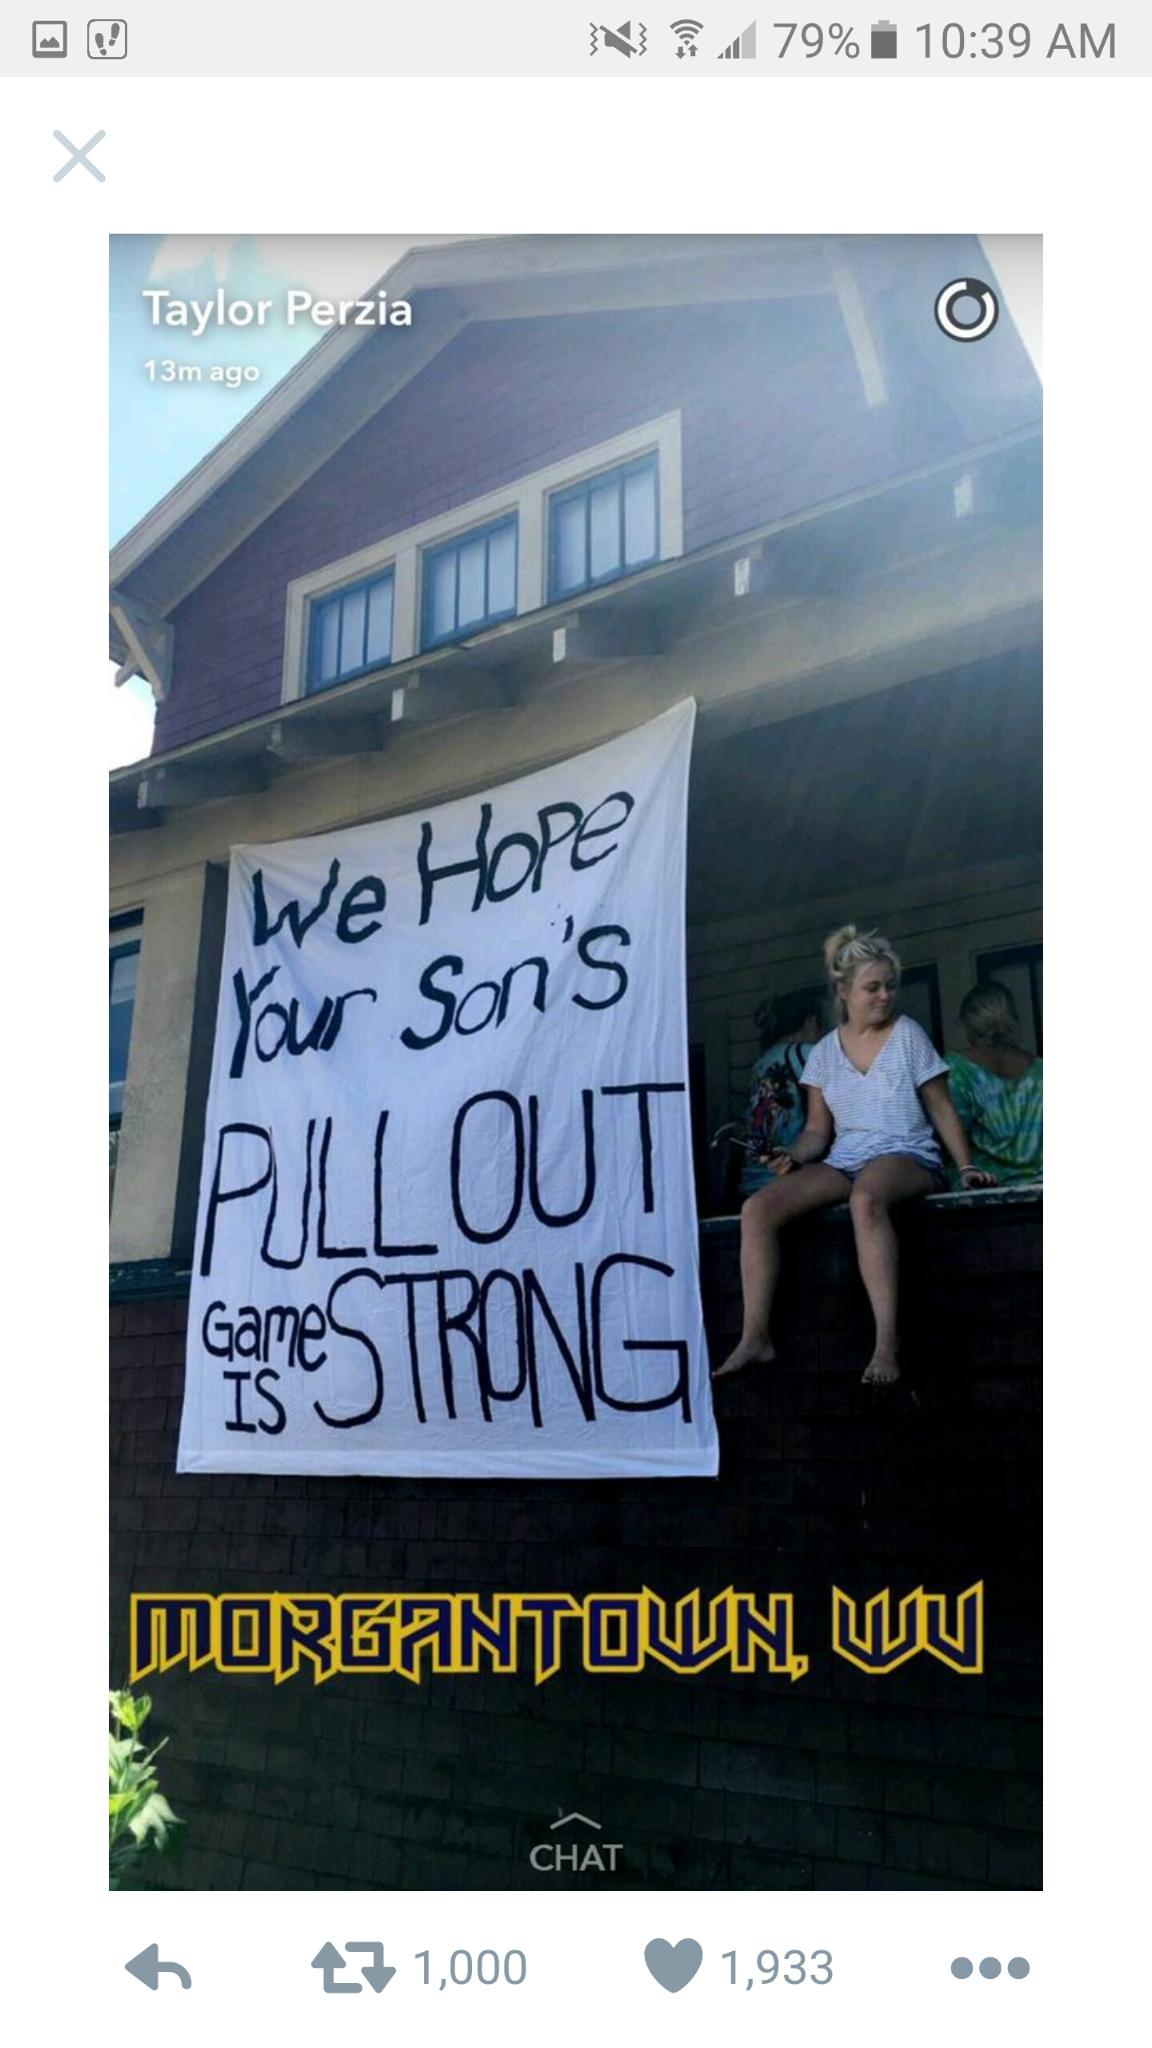 funny sorority move in signs - V 79% | Taylor Perzia 13m ago We Hope Your Son's All Out cares Trong Morgantown, Wu Chat 27 1,000 1,933